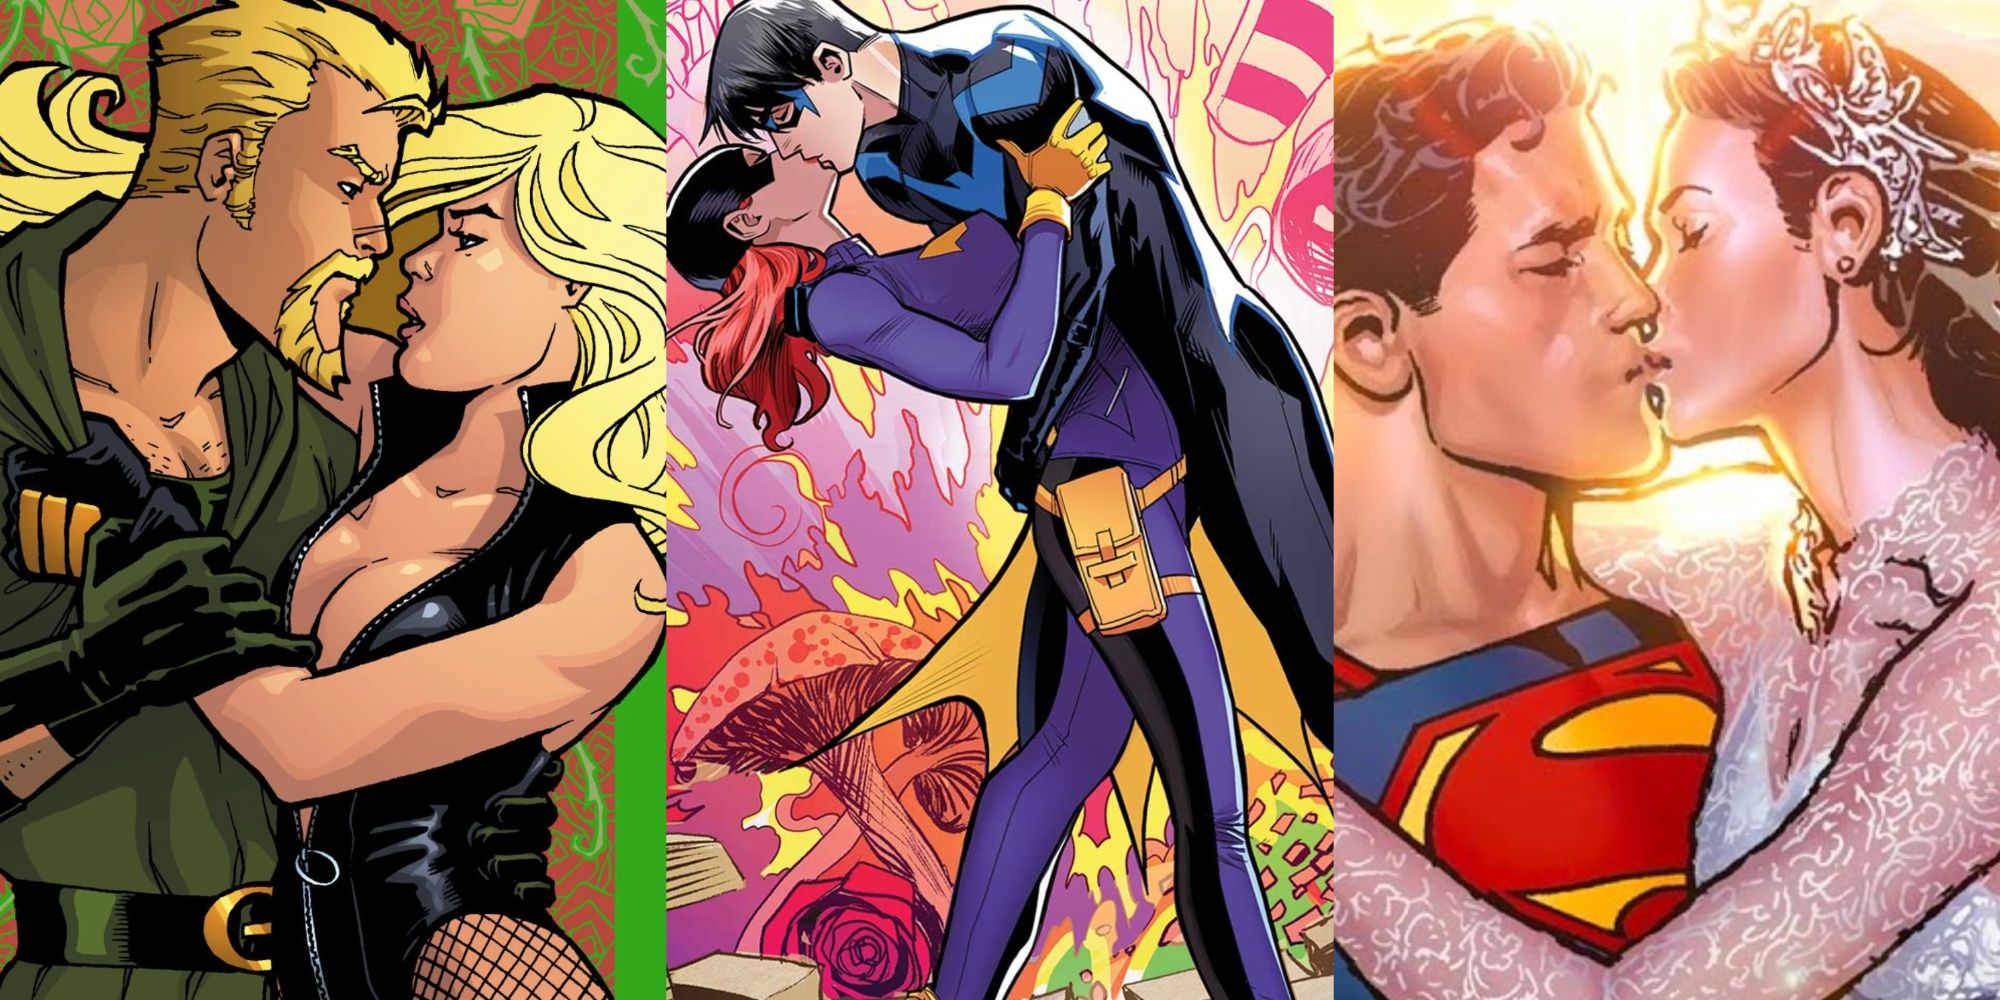 Split Image of Green Arrow and Black Canary embracing, Batgirl and Nightwing, and Lois Lane and Clark Kent kissing